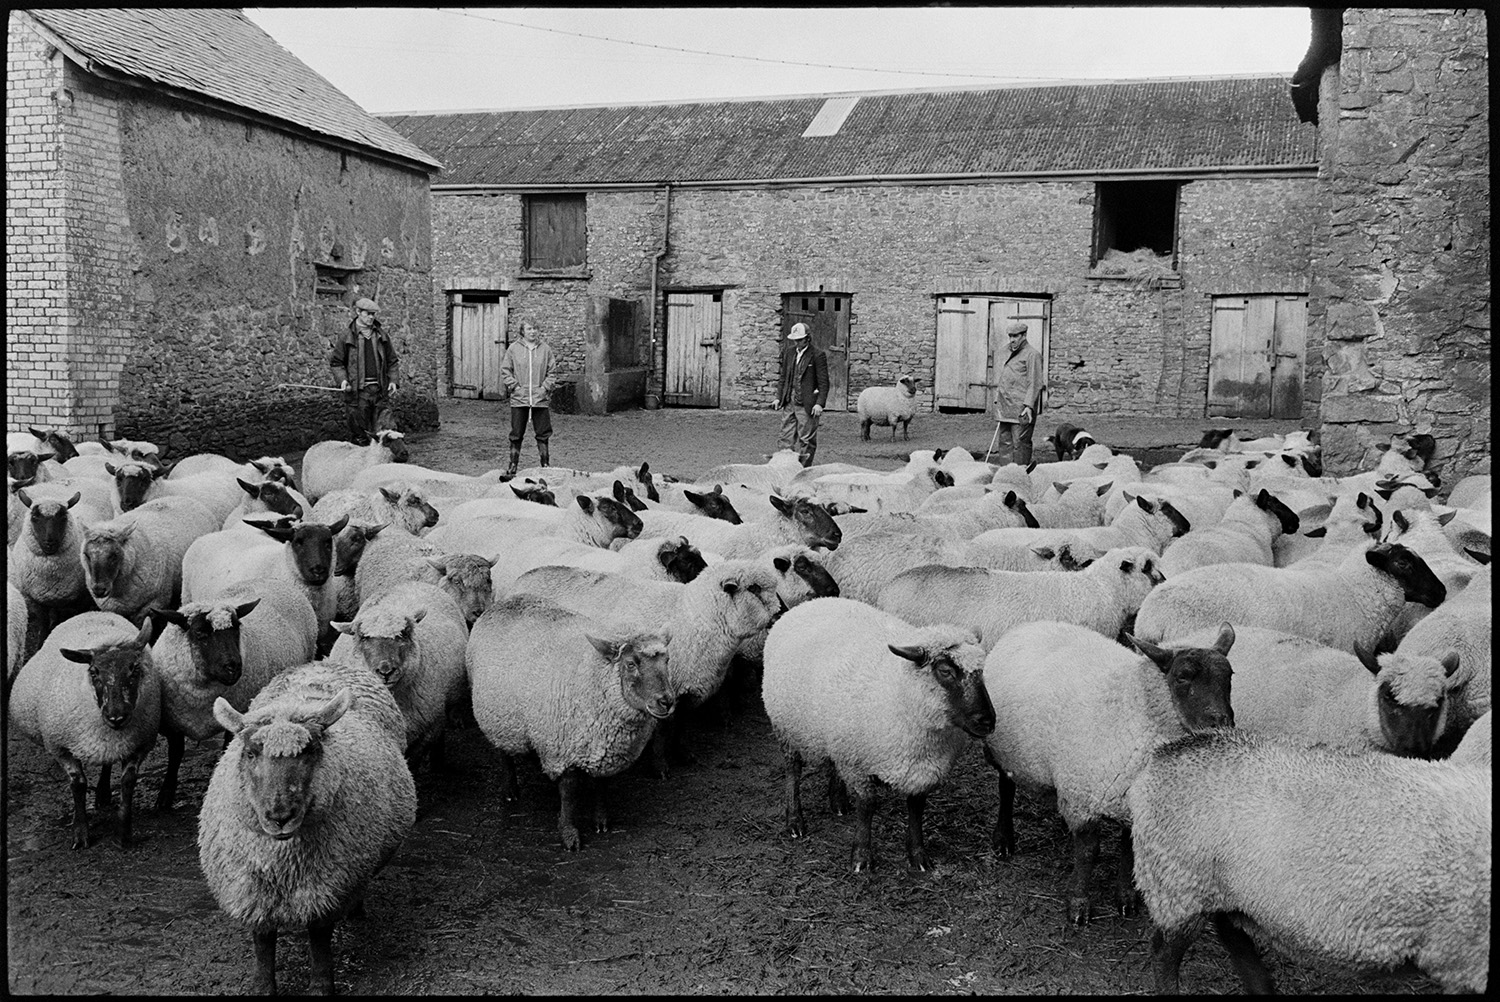 Woman farmer counting sheep flock going down lane to pasture. 
[Members of the Elworthy family rounding up sheep in the farmyard at Narracott, Hollocombe before taking them to new pasture. A stone barn with a corrugated iron roof and tallet can be seen in the background.]